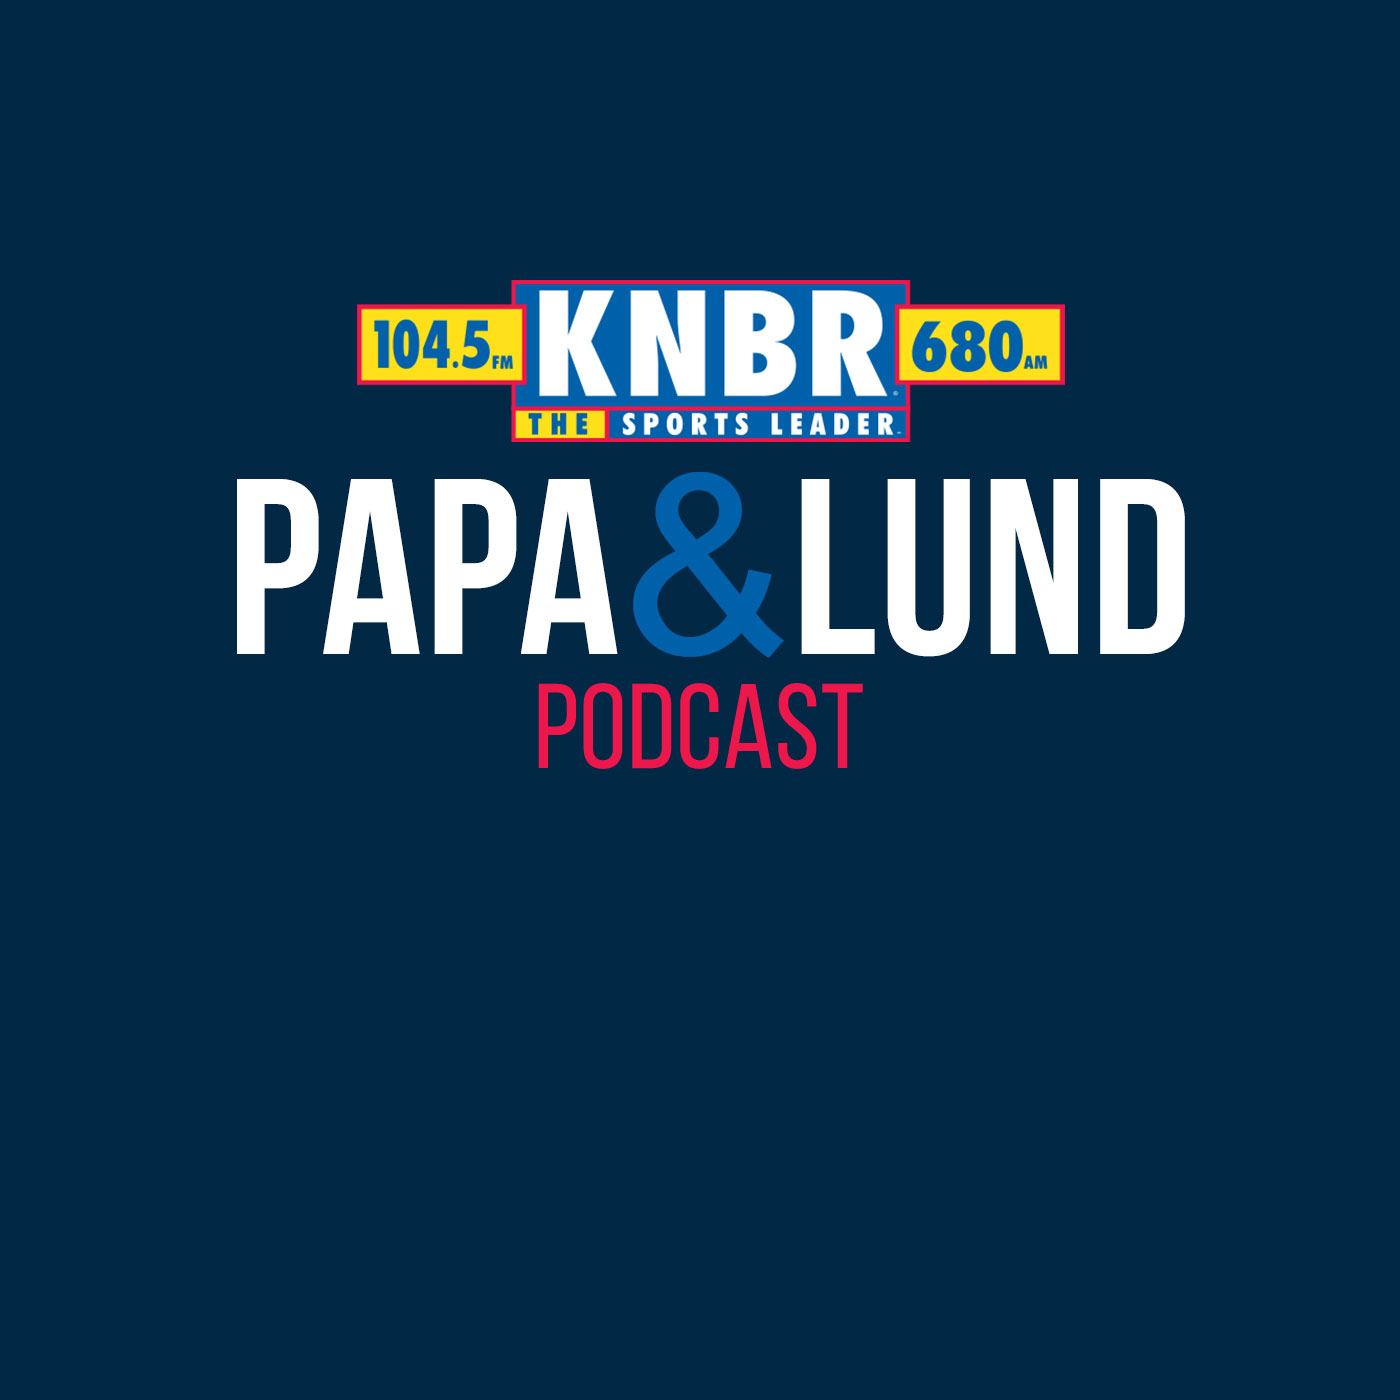 2-3 Former Giant Rich Aurilia joins Papa & Lund to talk about the hopeful beginning of the 2022 season